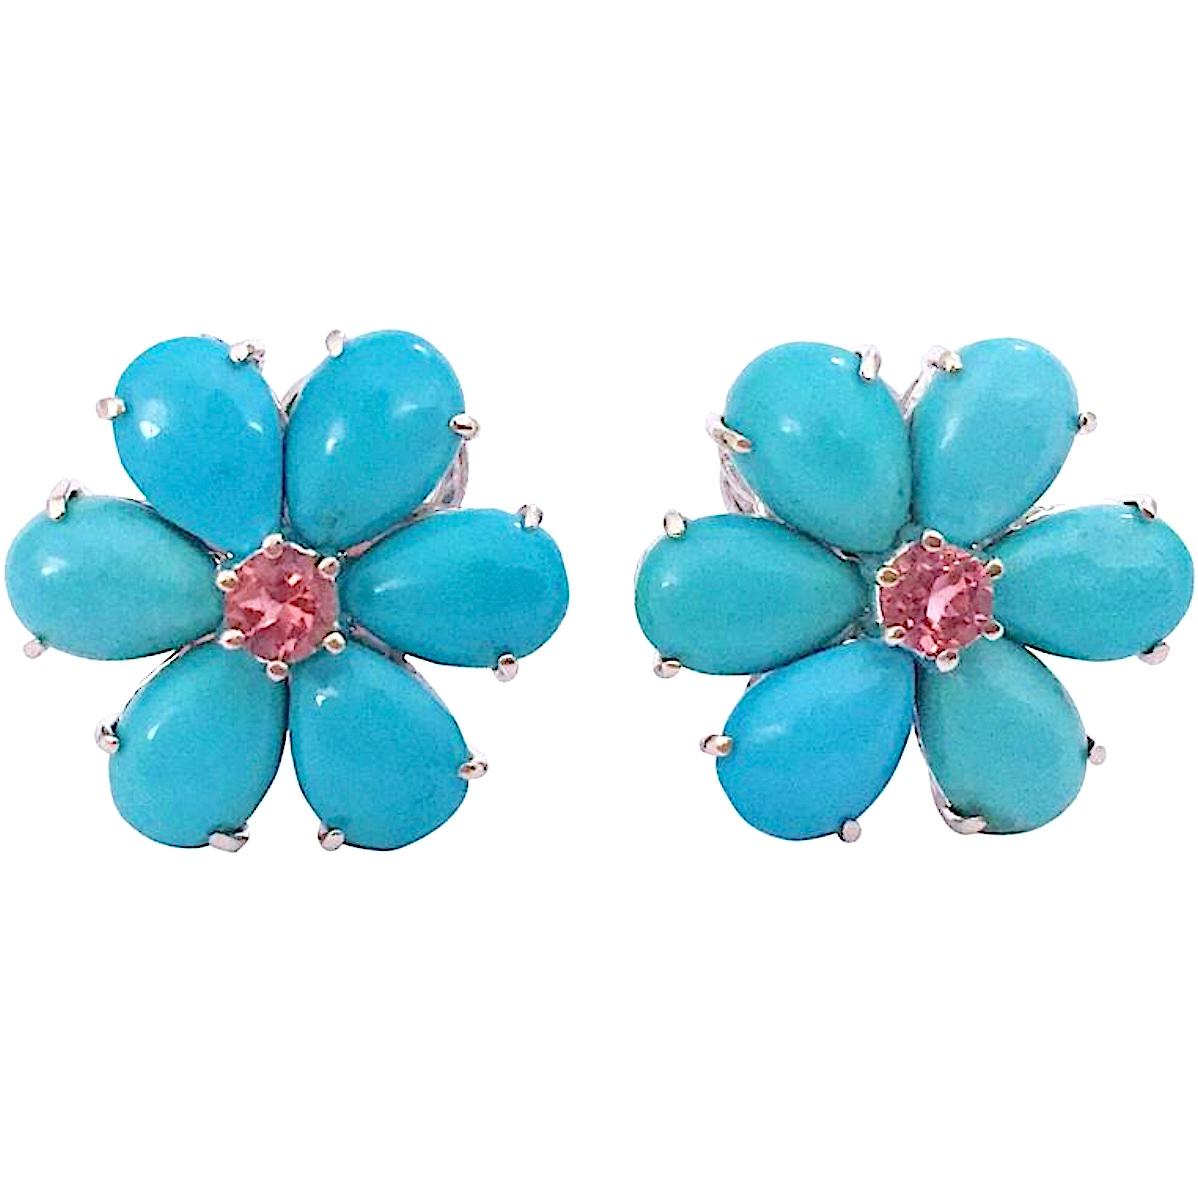 Cabochon Christina Addison Turquoise Flower Stud Earrings with Diamond Center